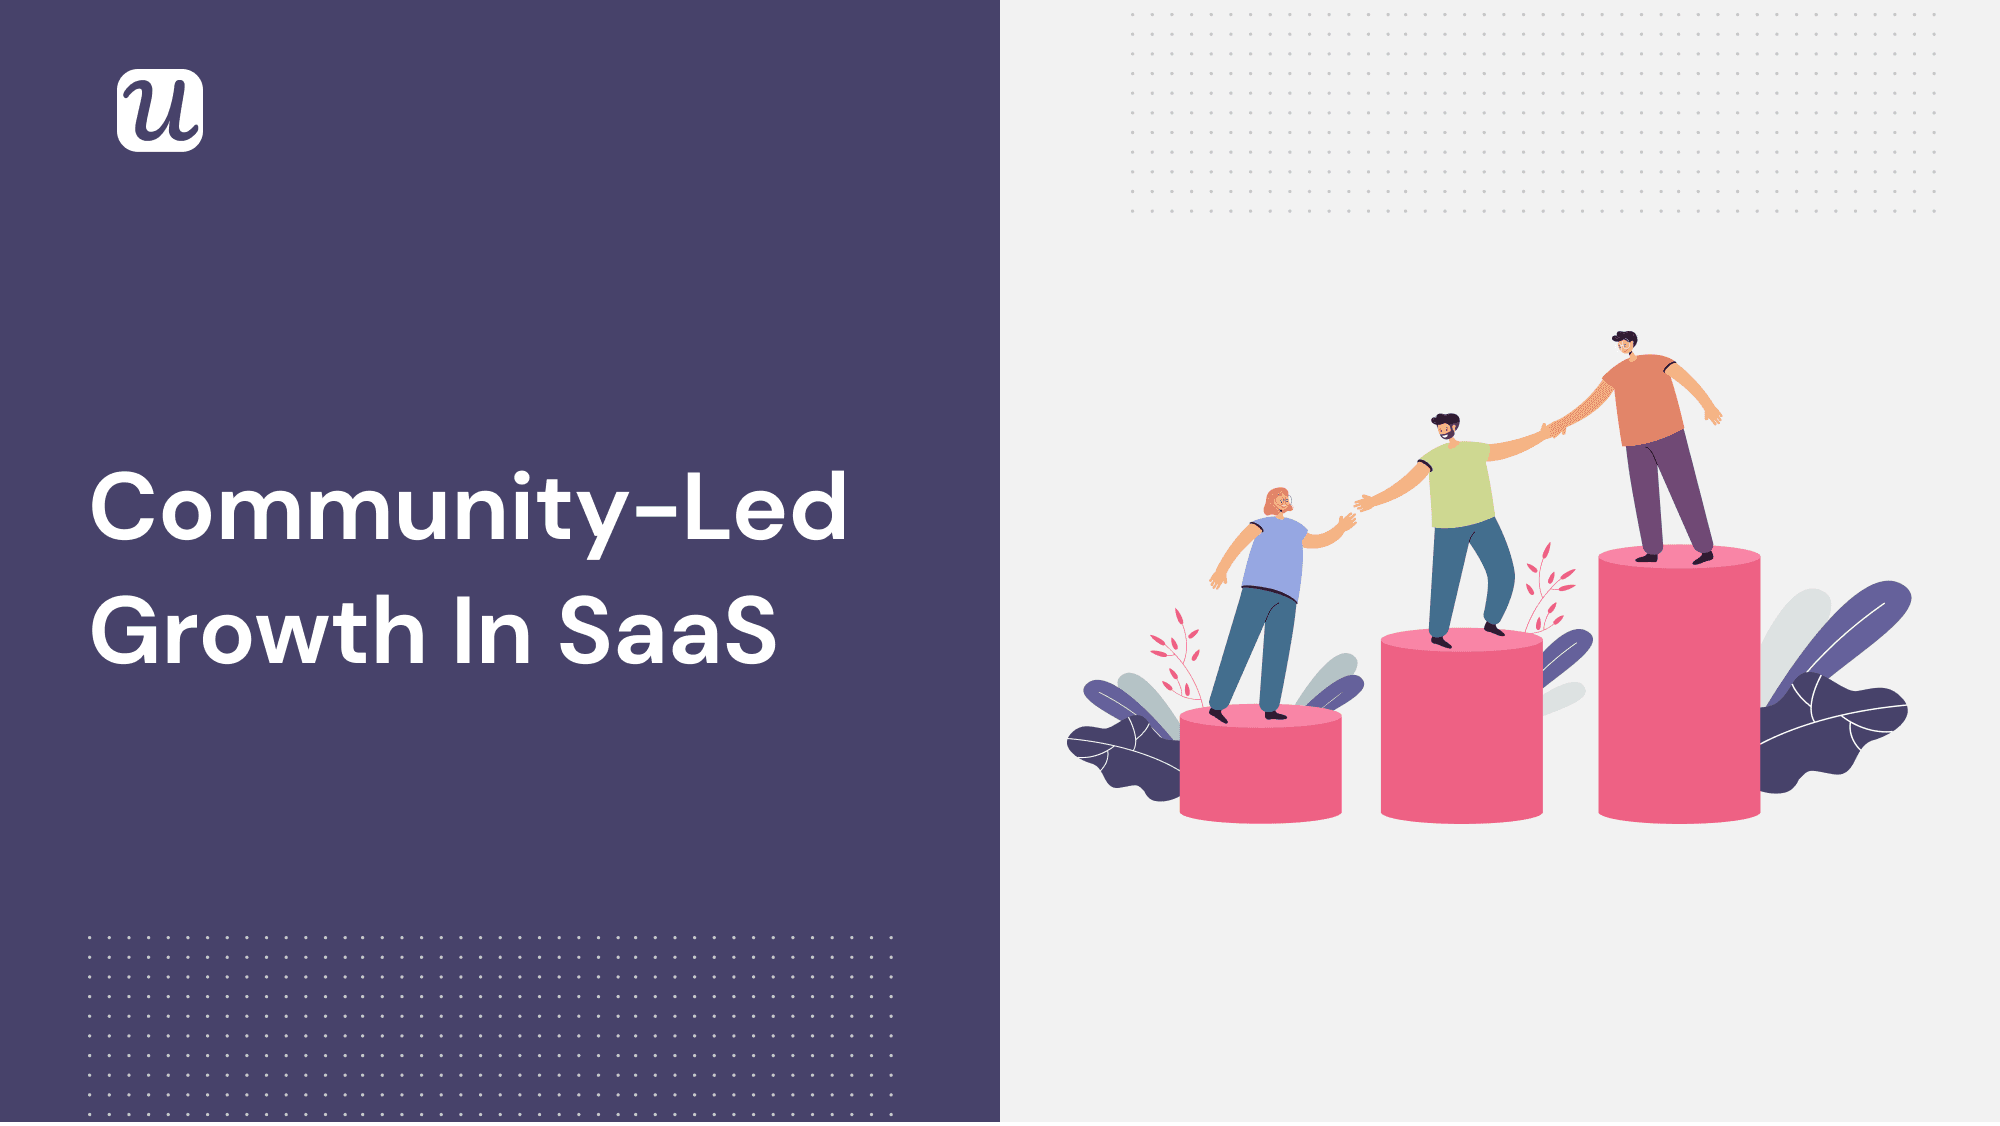 Say Hello To The Age Of Community-Led Growth in SaaS